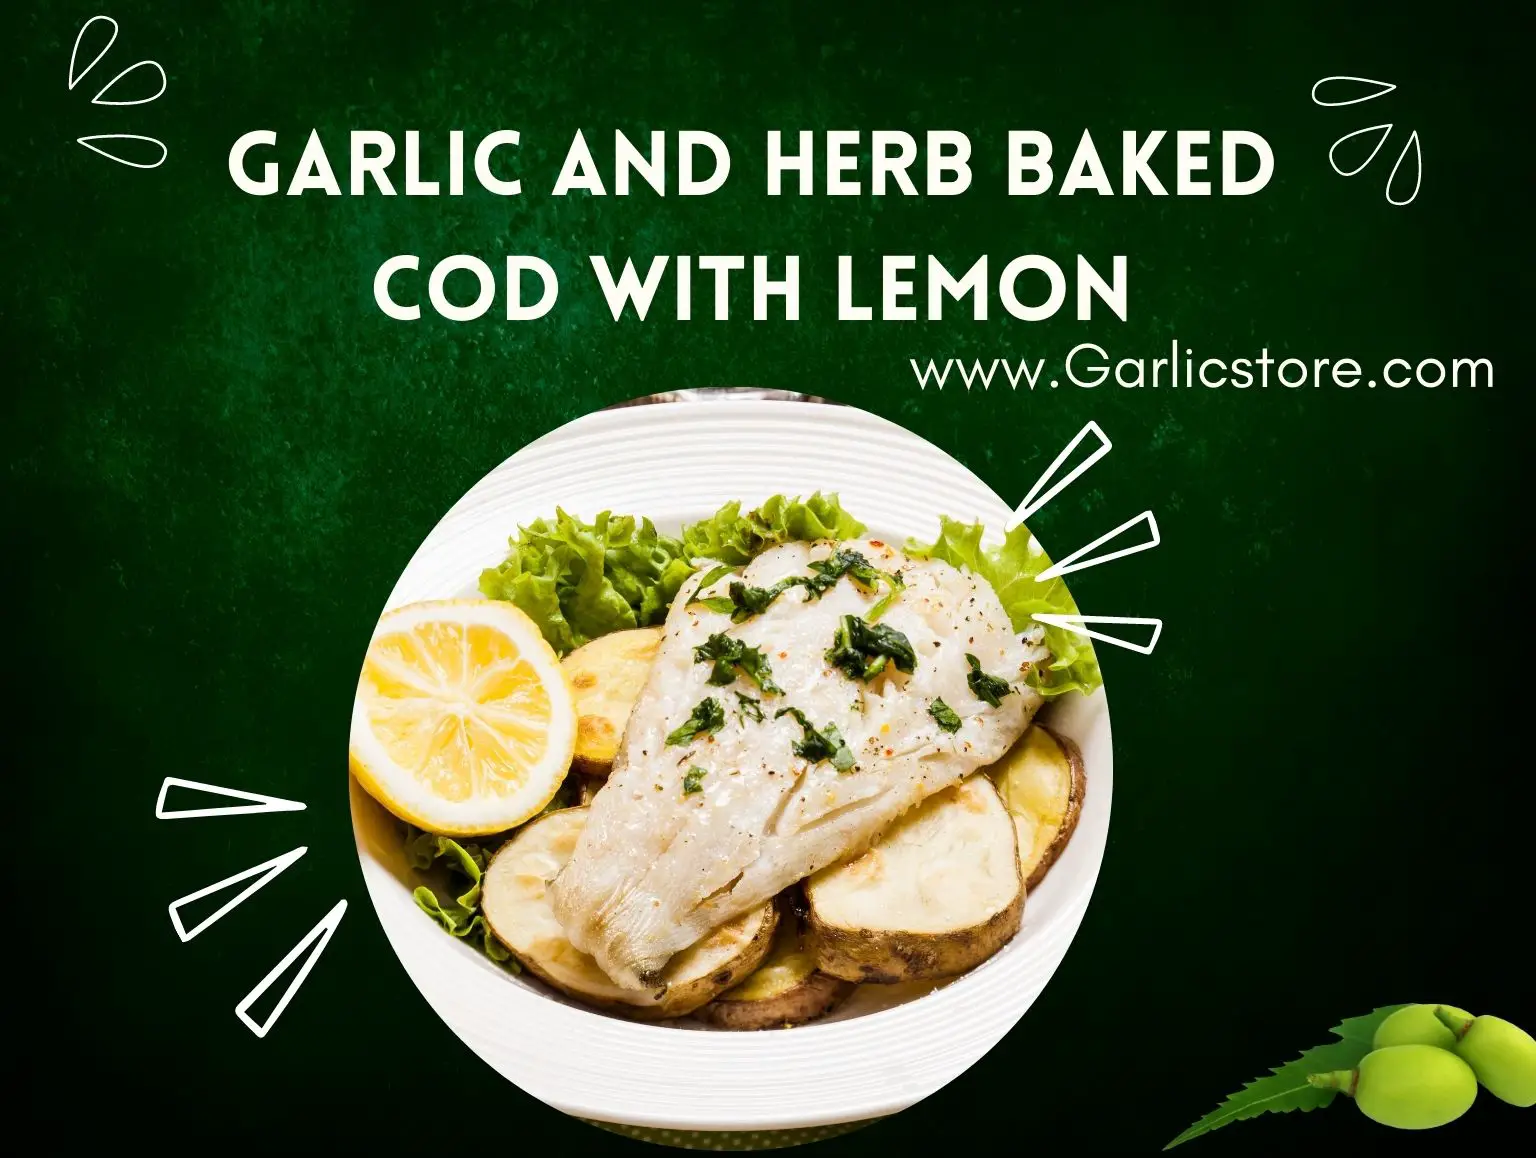 Garlic and Herb Baked Cod with Lemon